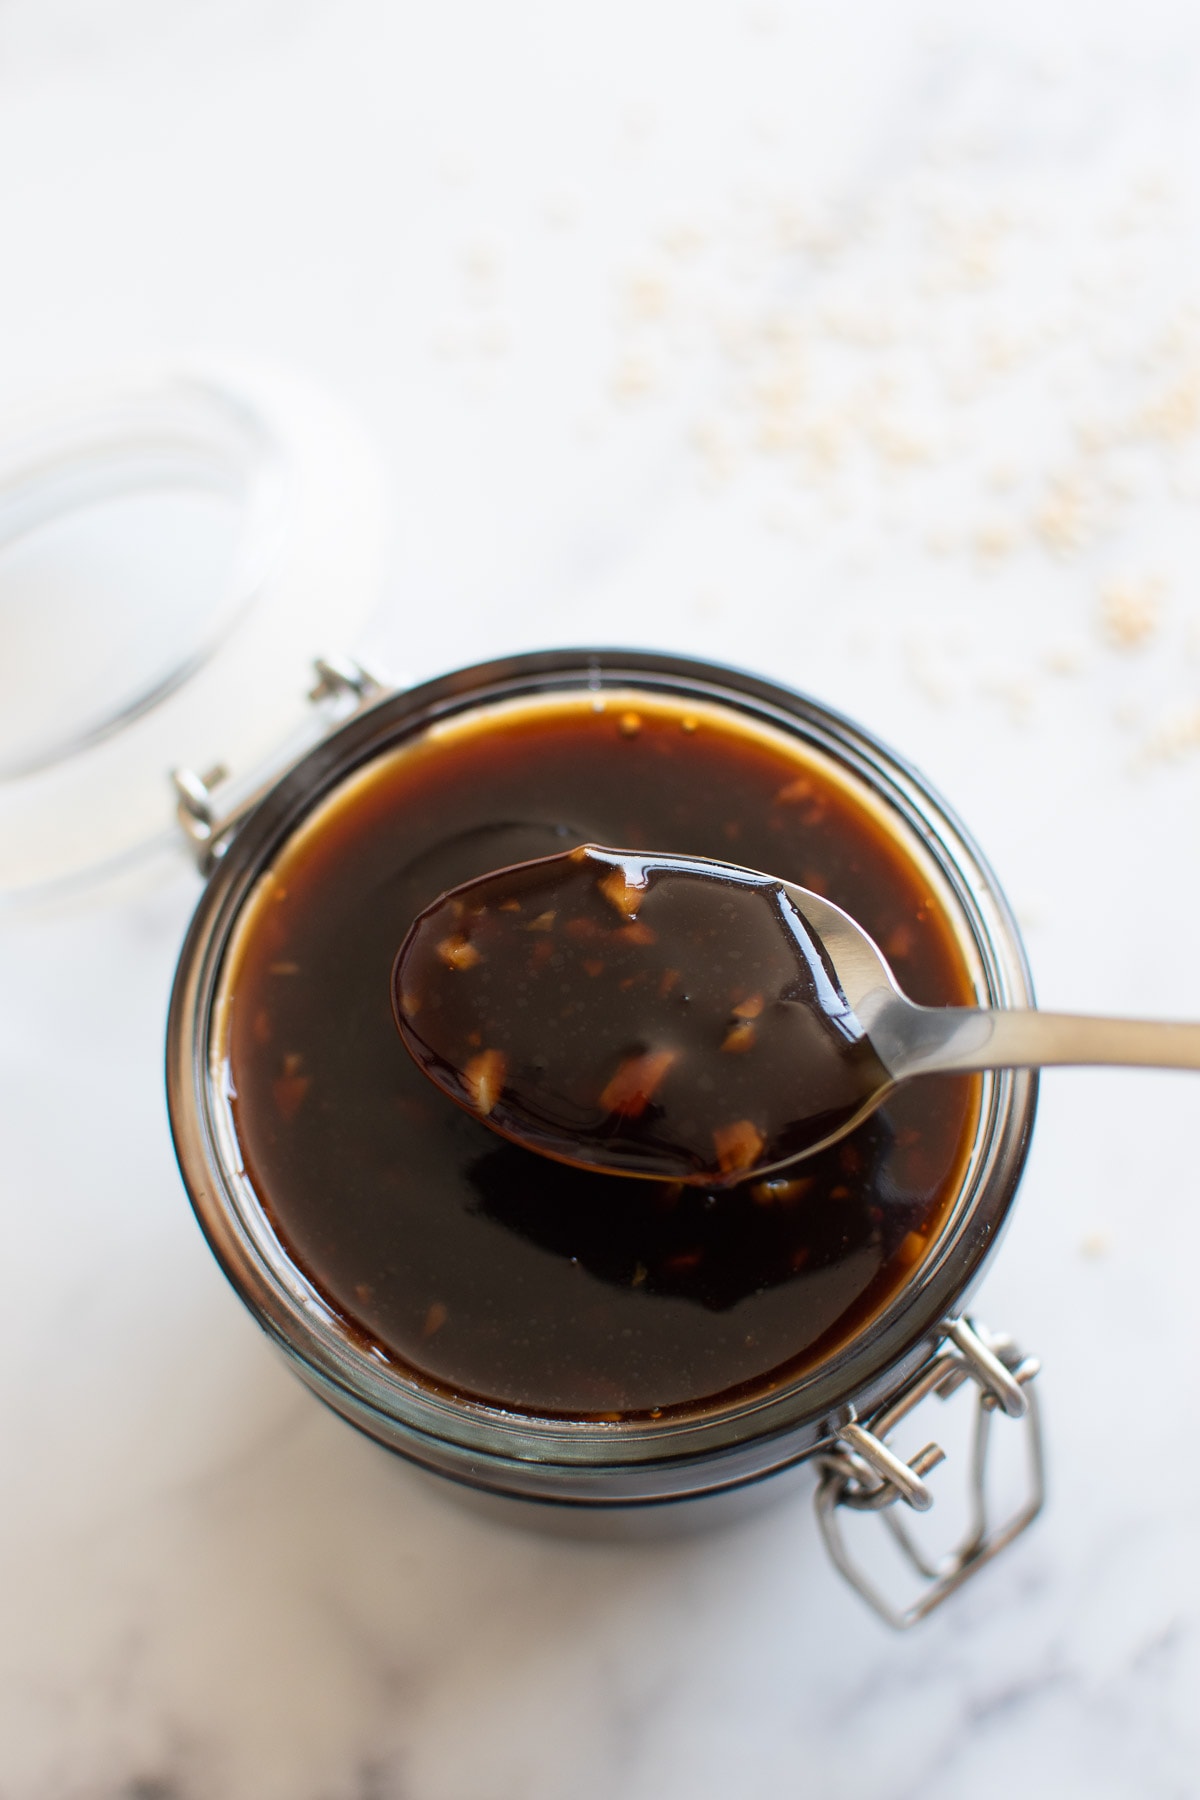 A jar of teriyaki sauce, with a spoon lifting up a serving.